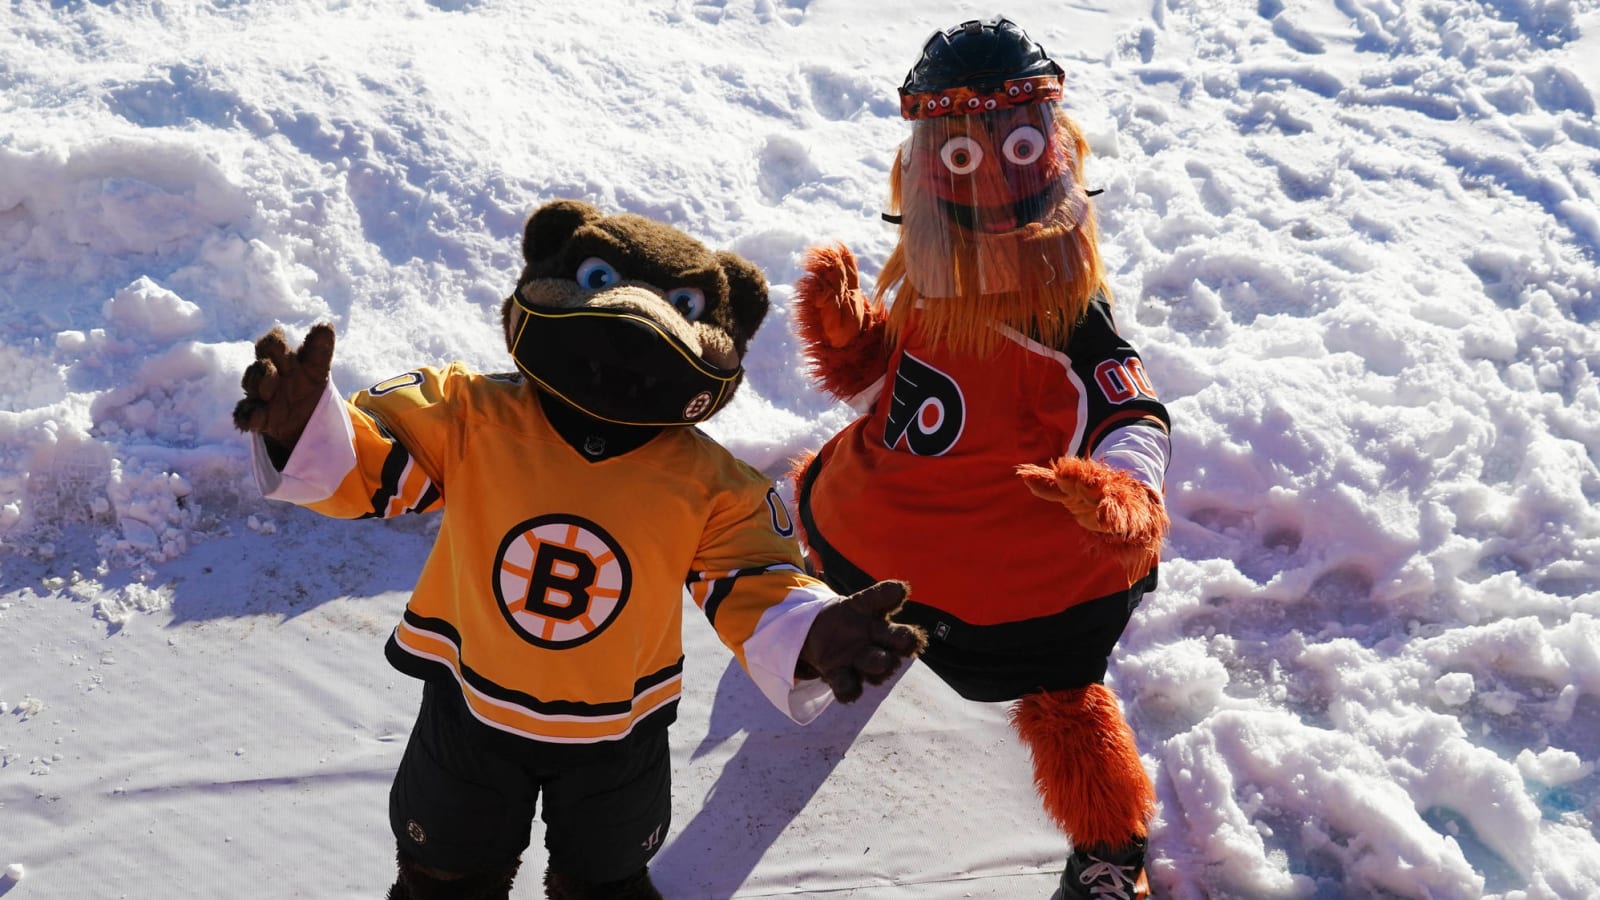 Gritty appeared at Lake Tahoe wedding before Flyers-Bruins game